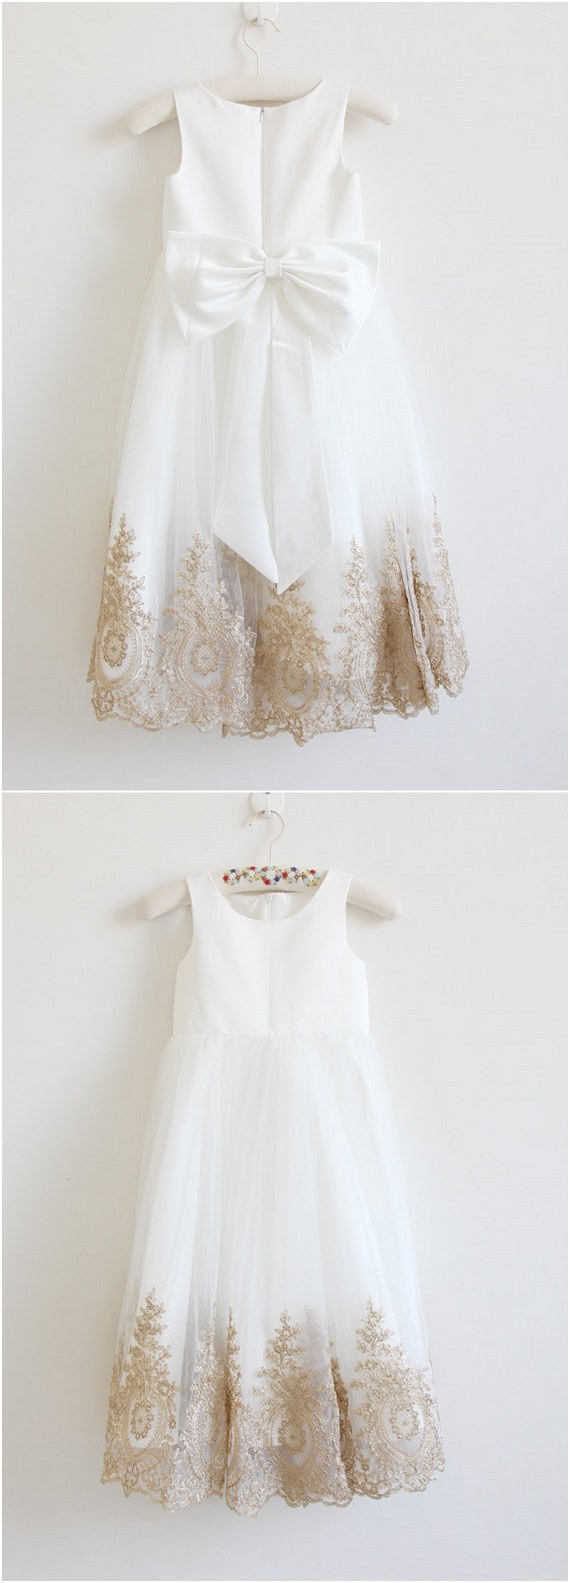 Light Ivory Flower Girl Dress with Gold Embroidery